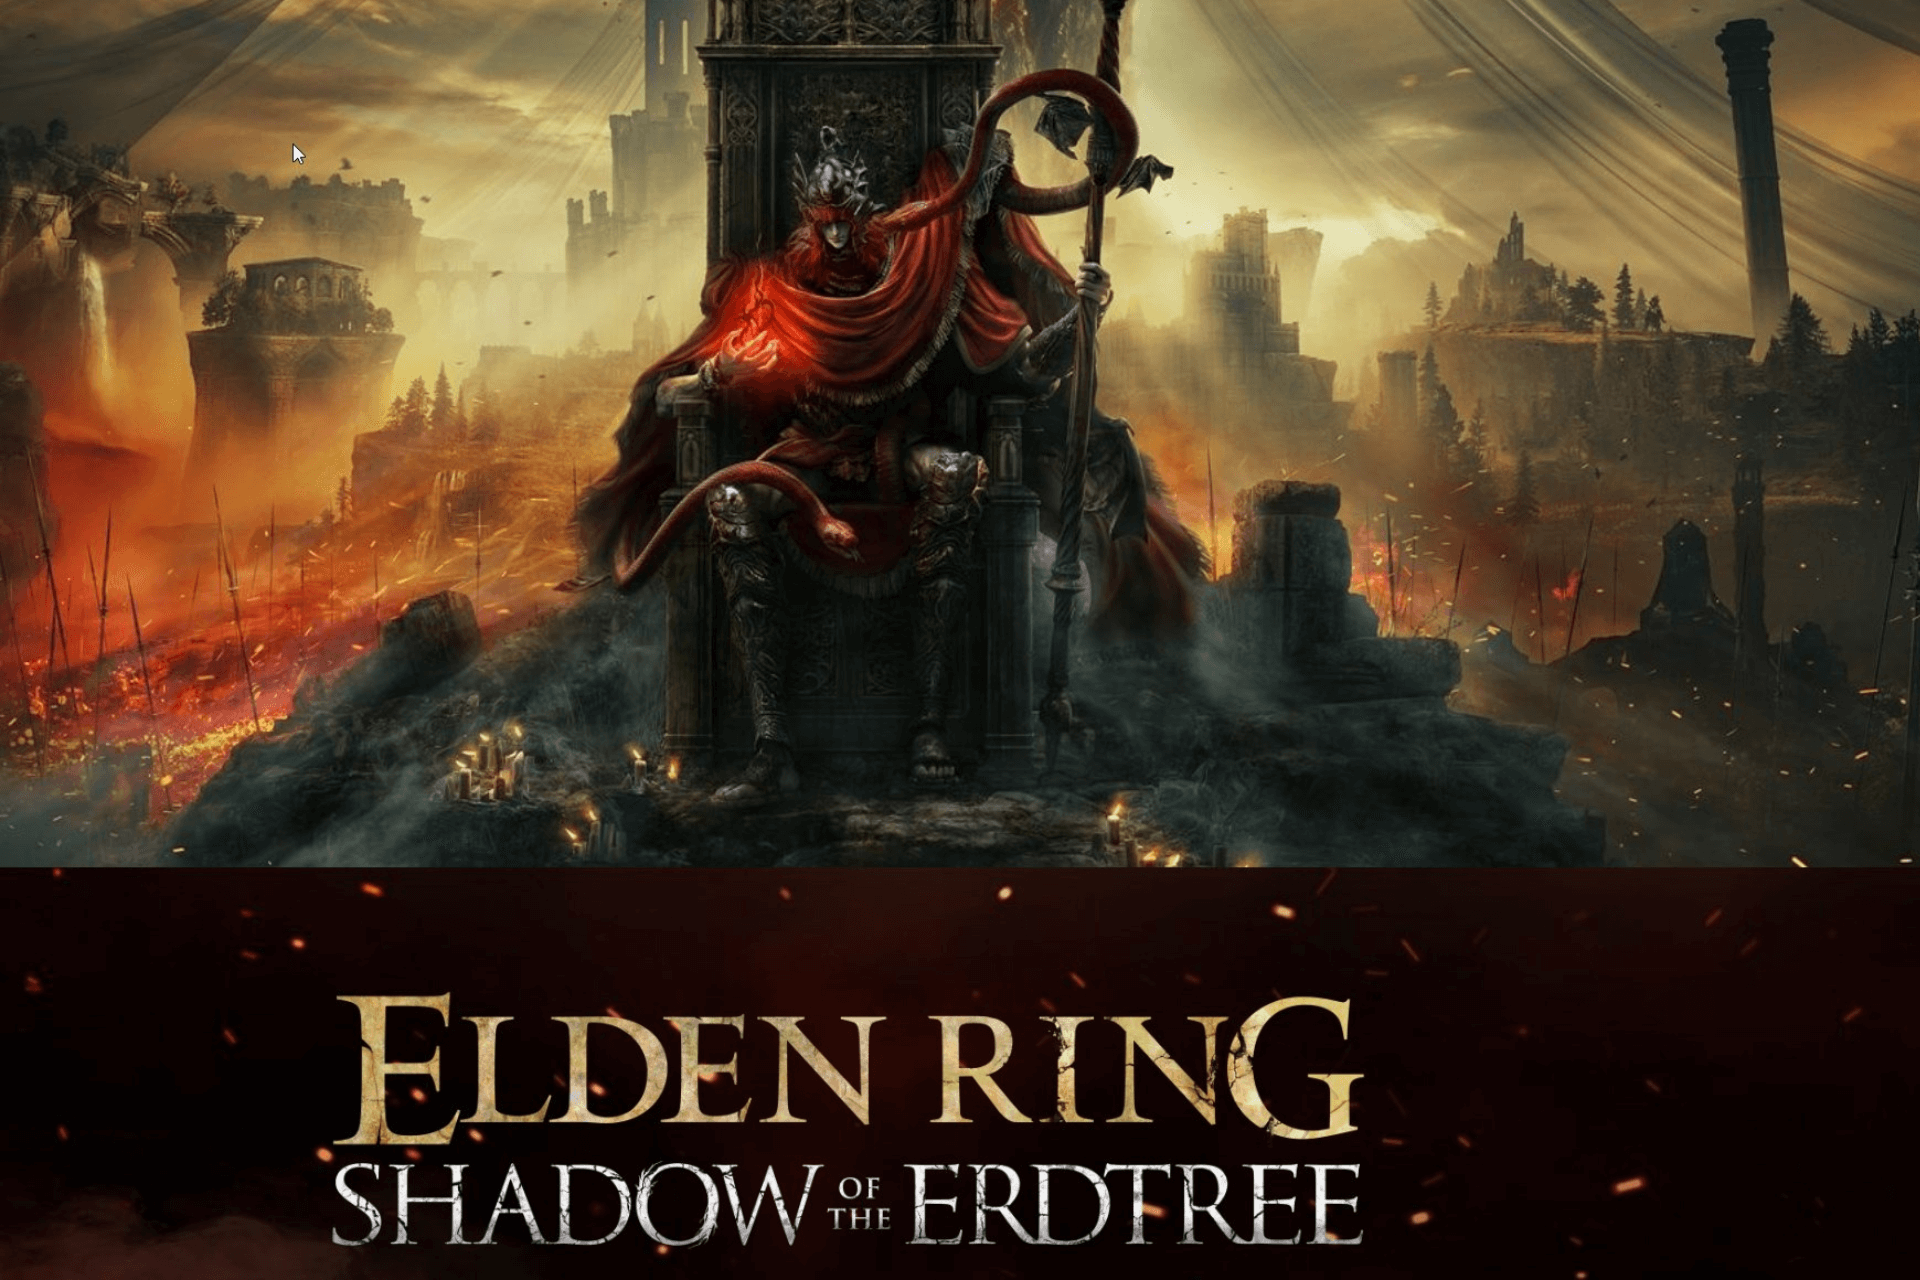 Elden Ring: Shadow of the Erdtree is coming to Xbox this June